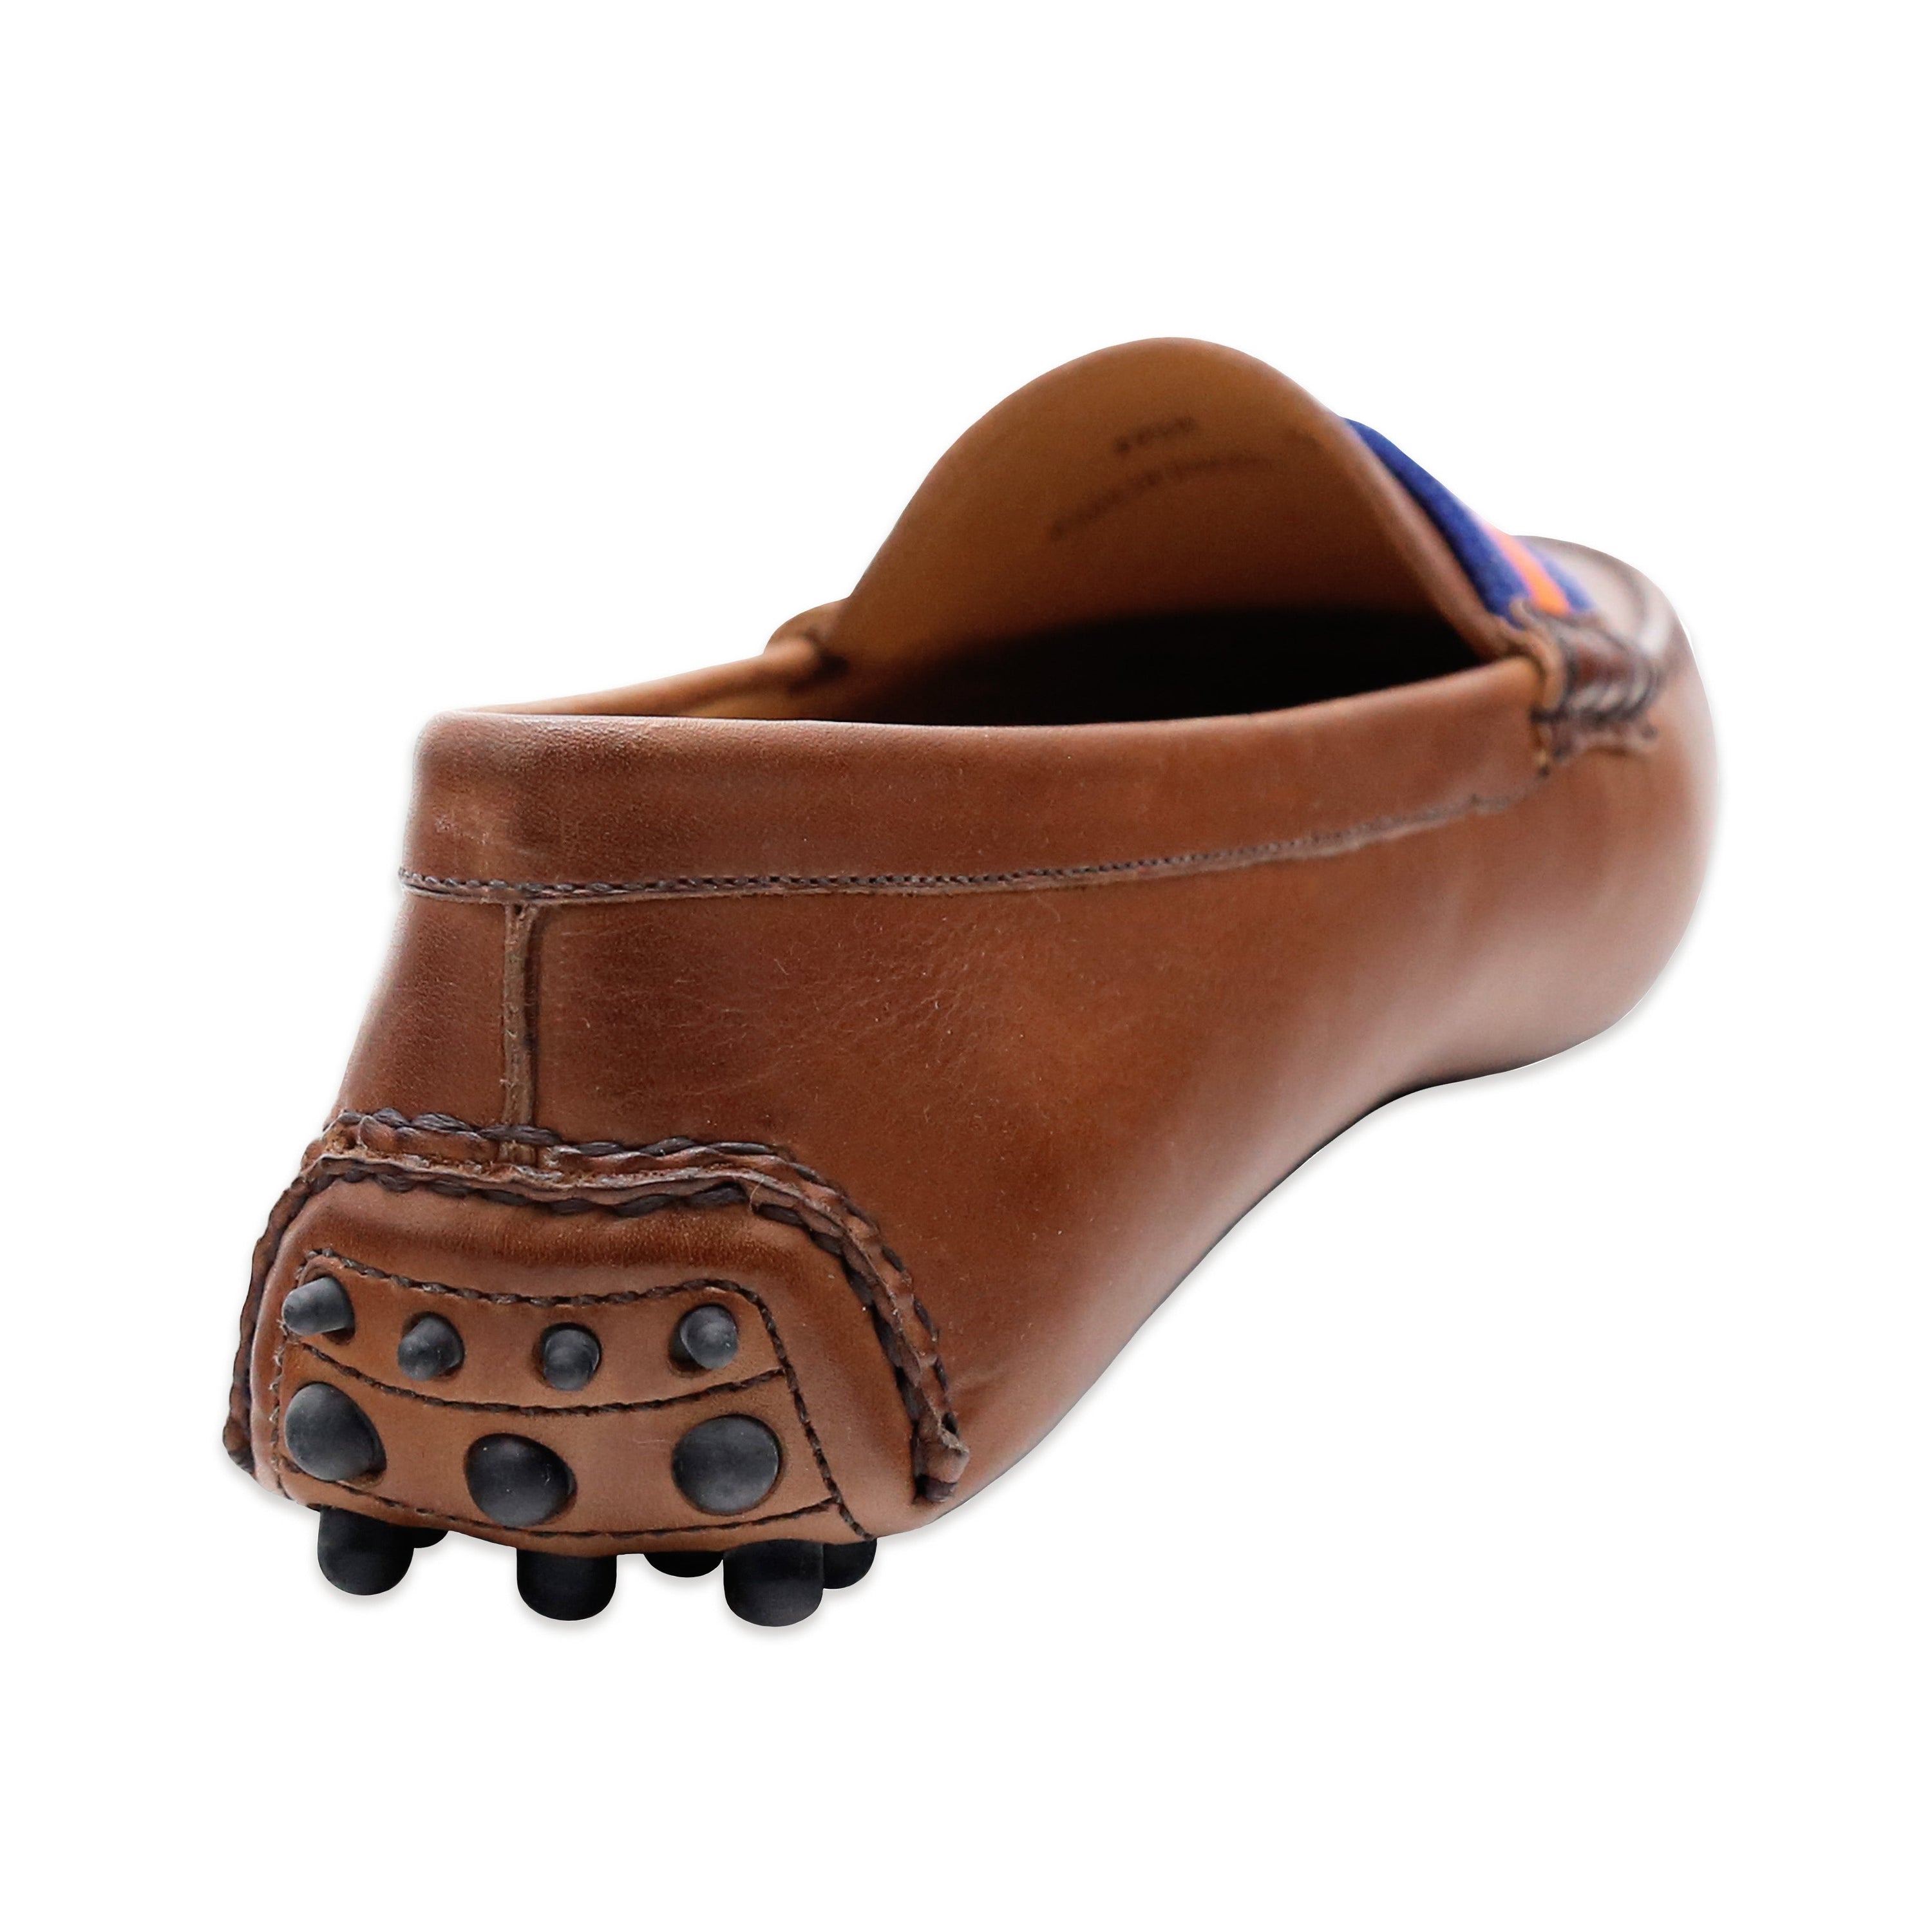 Kentucky Surcingle Driving Shoes (Blue-White) & – Leather-Logo) Smathers Branson (Chestnut